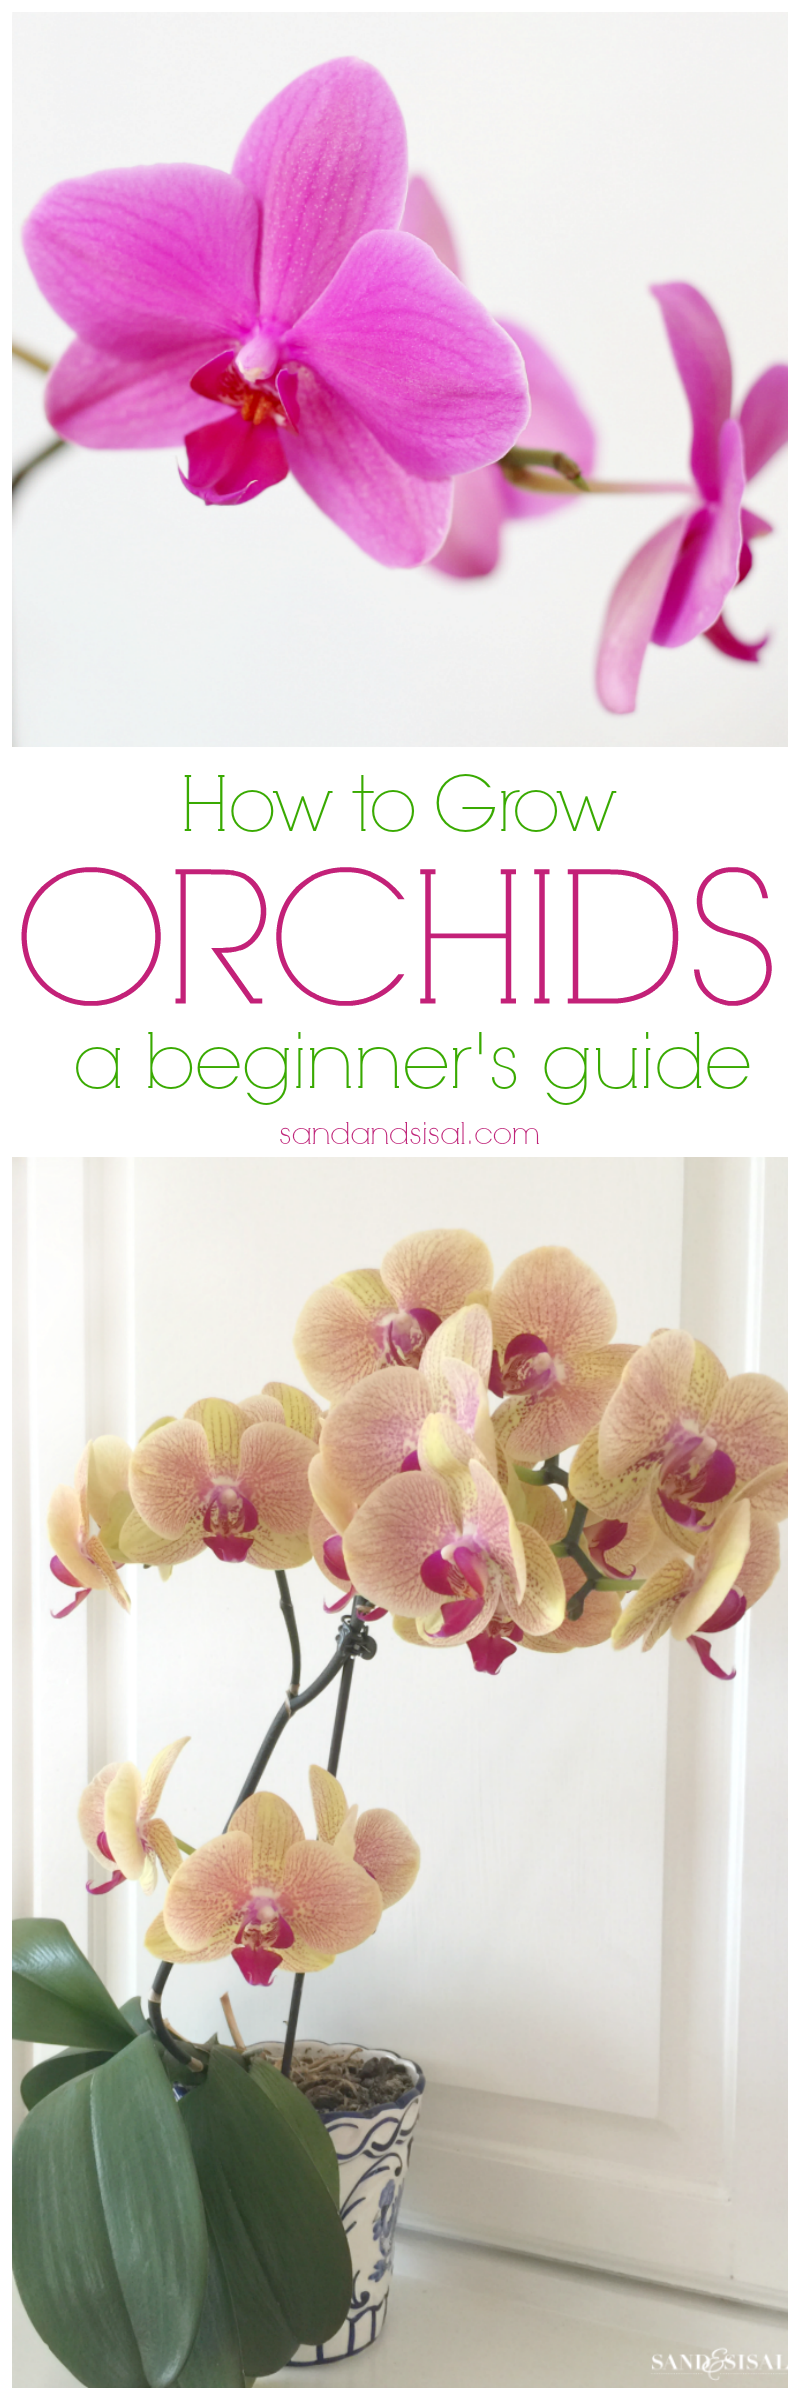 How to Grow Orchids - A beginner